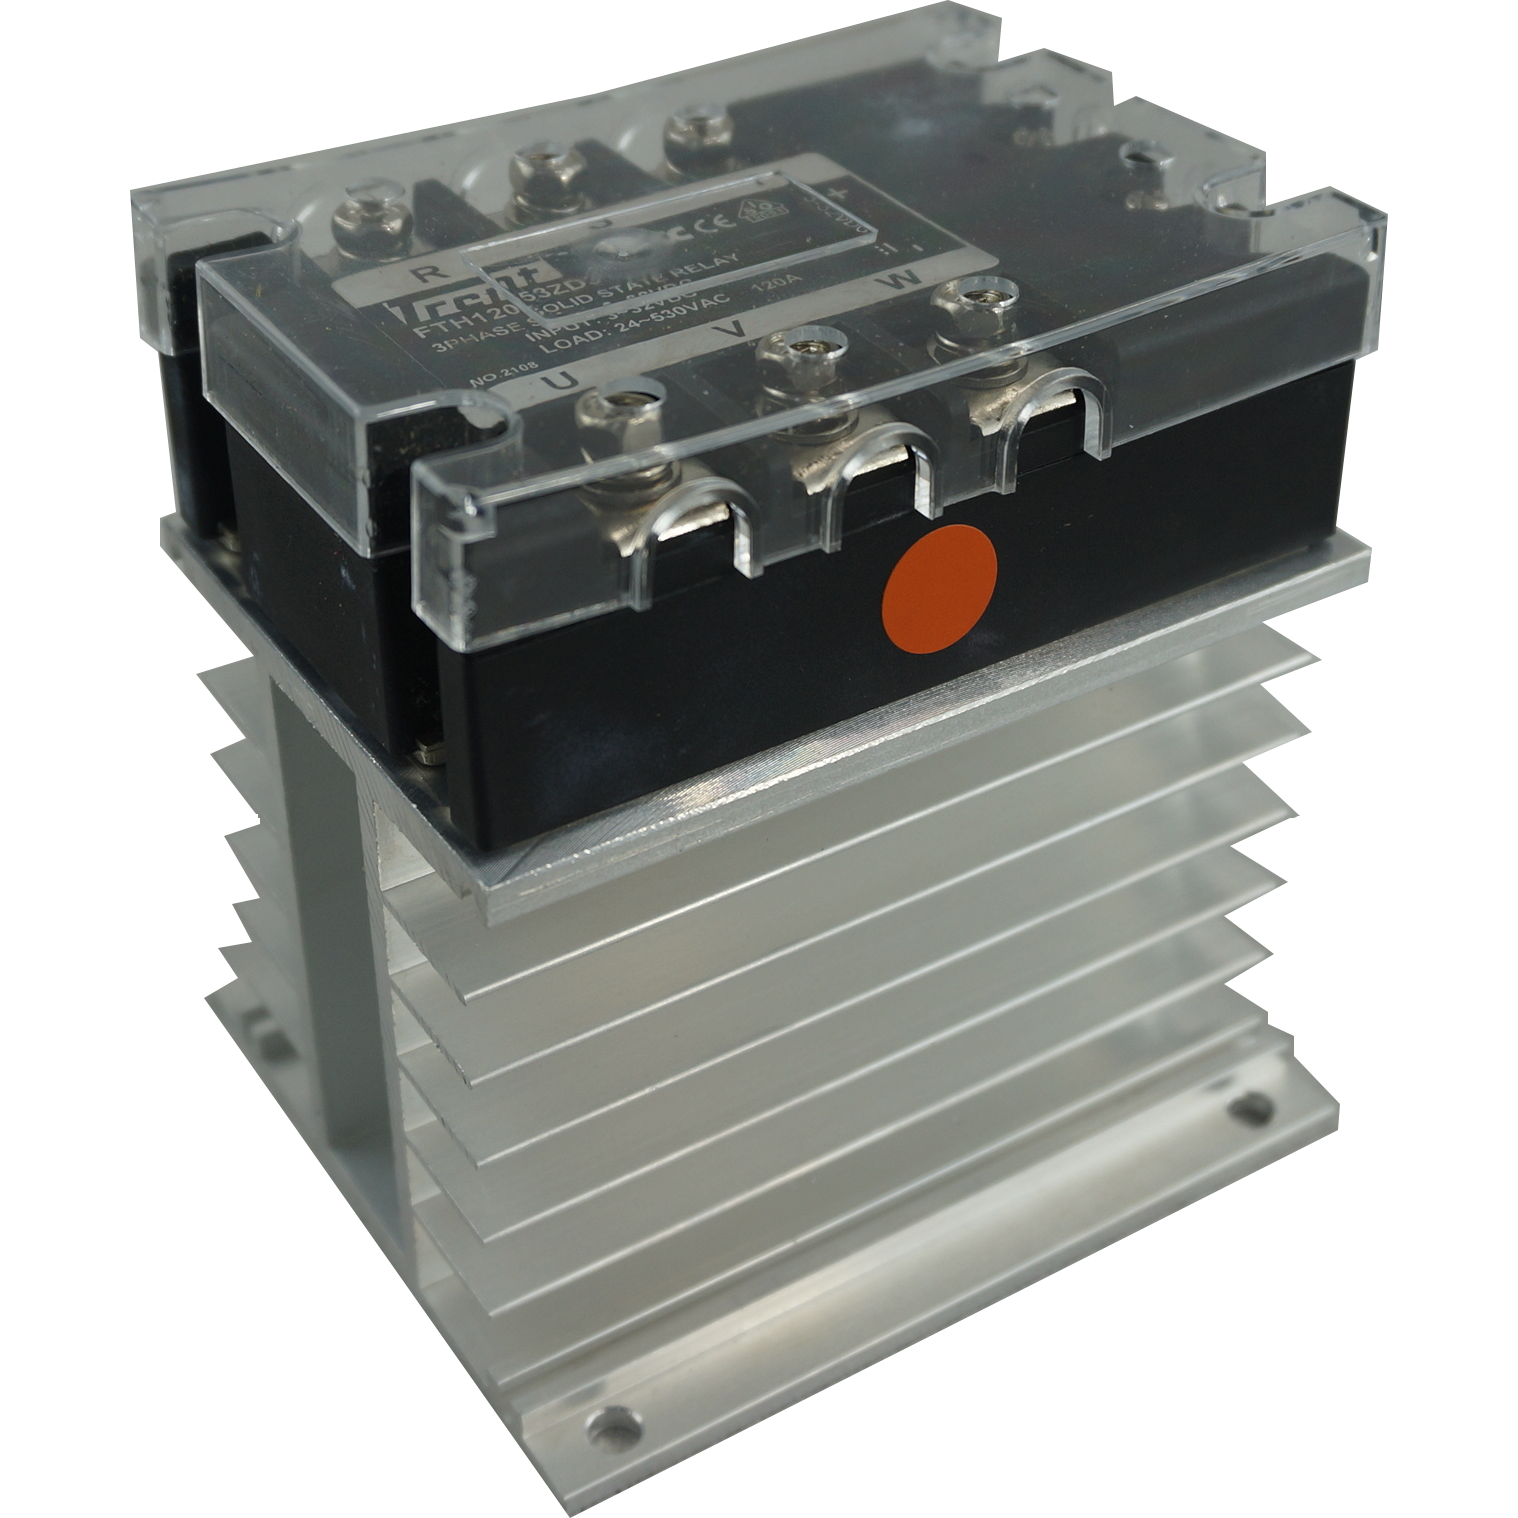 FTH2553ZA4 + HS212DR, Solid State Relay, and Heatsink Assembly, 3 Phase 90-280VAC Control, 20 Amp per phase @ 40 Deg C, 48-530VAC Load, LED Status Indicator, with IP20 Cover